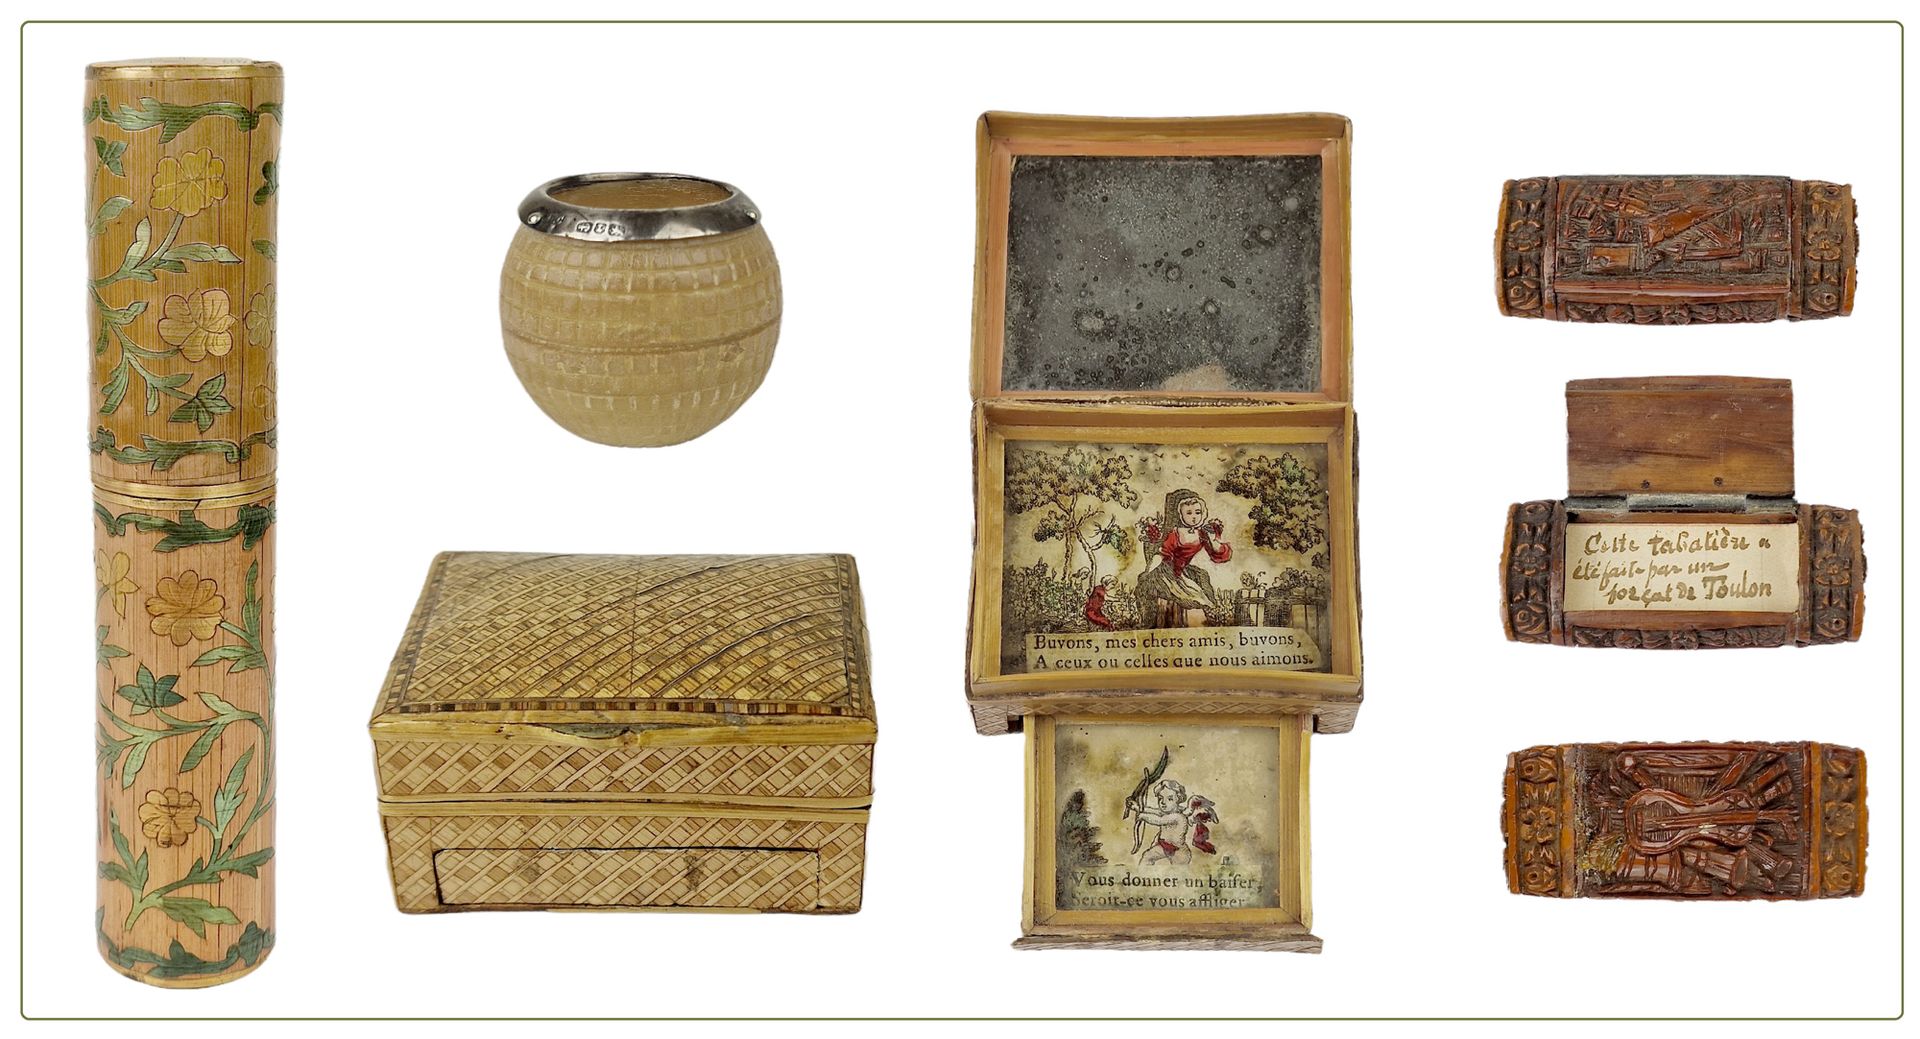 OBJETS DE VITRINE -

Including a cylindrical case in straw marquetry, a small bo&hellip;